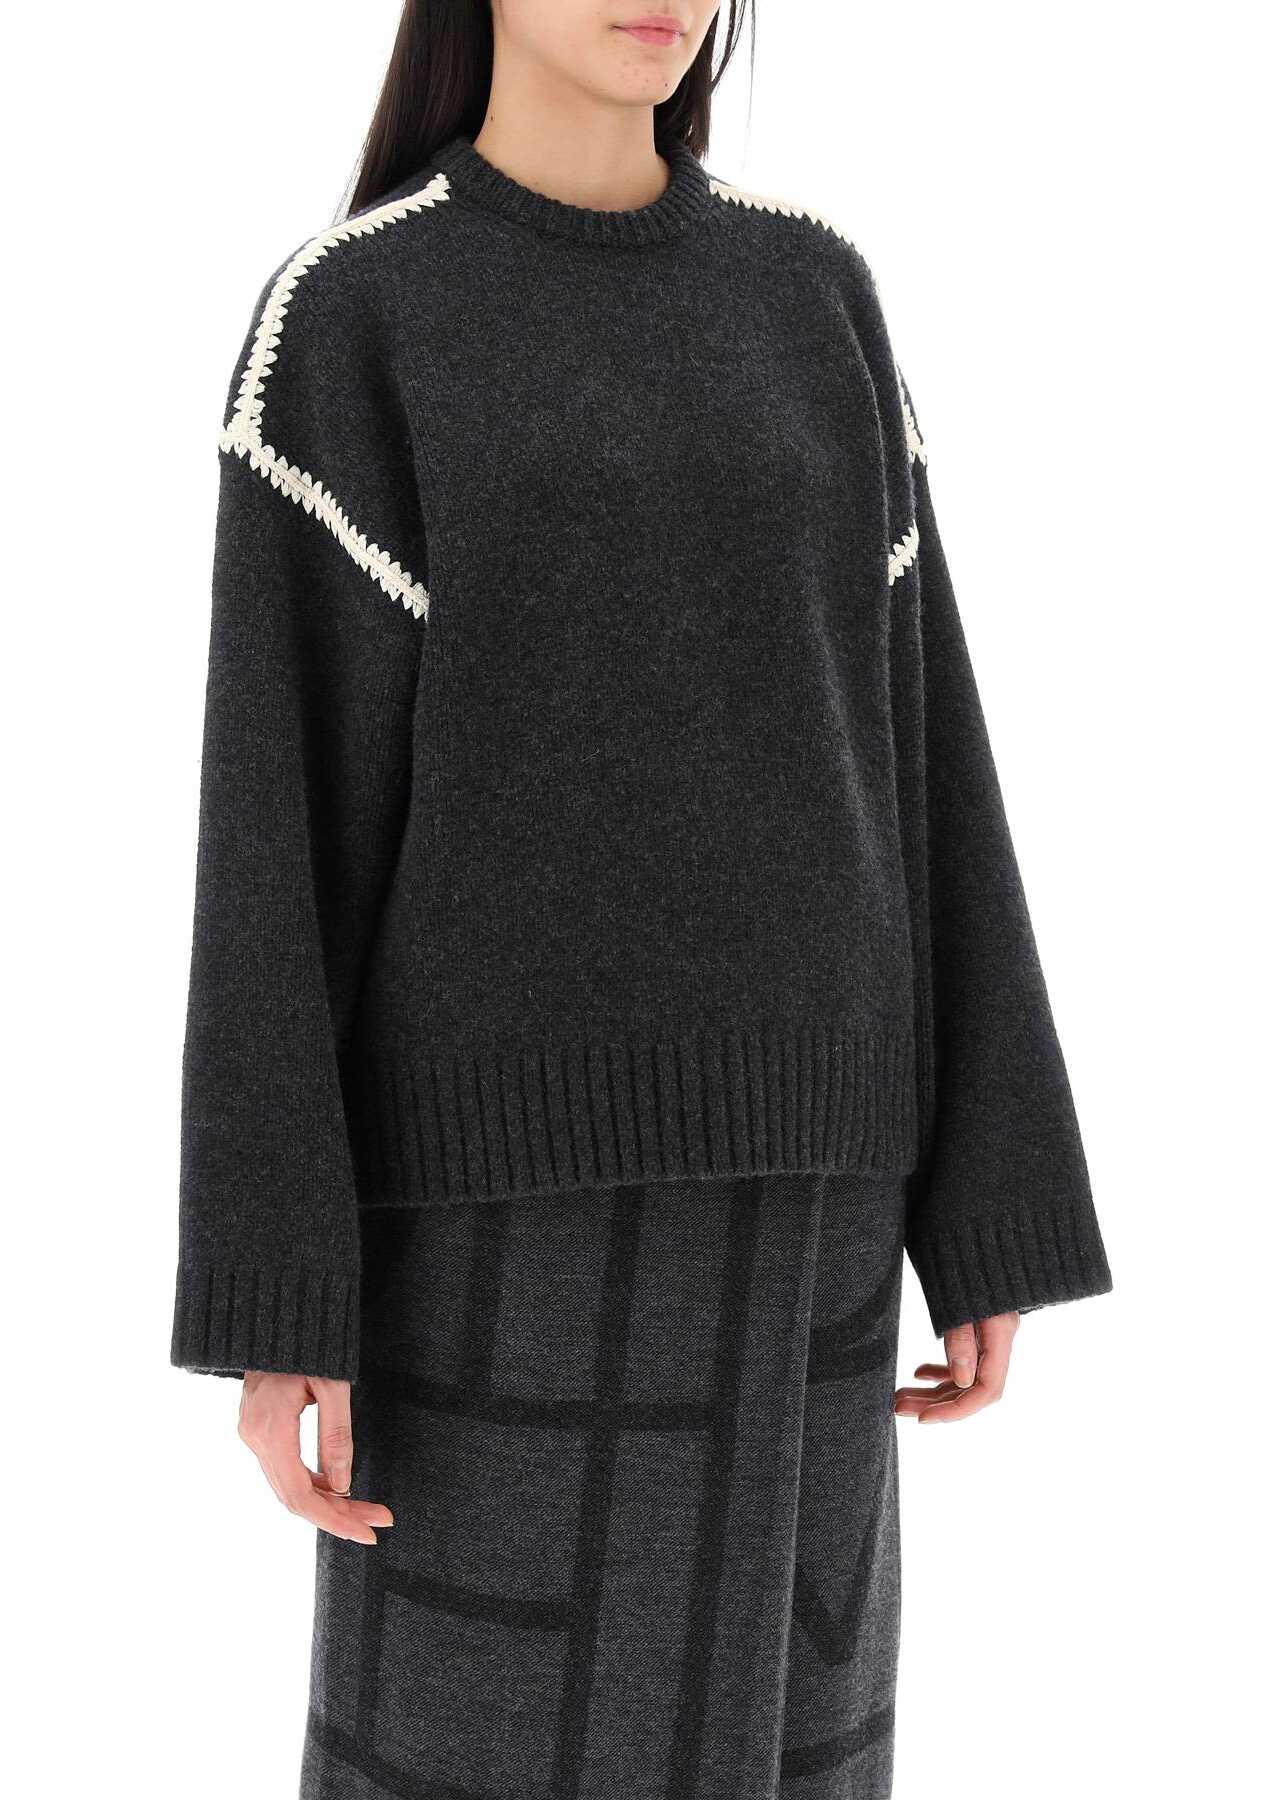 TOTÊME Sweater With Contrast Embroideries GREY MELANGE